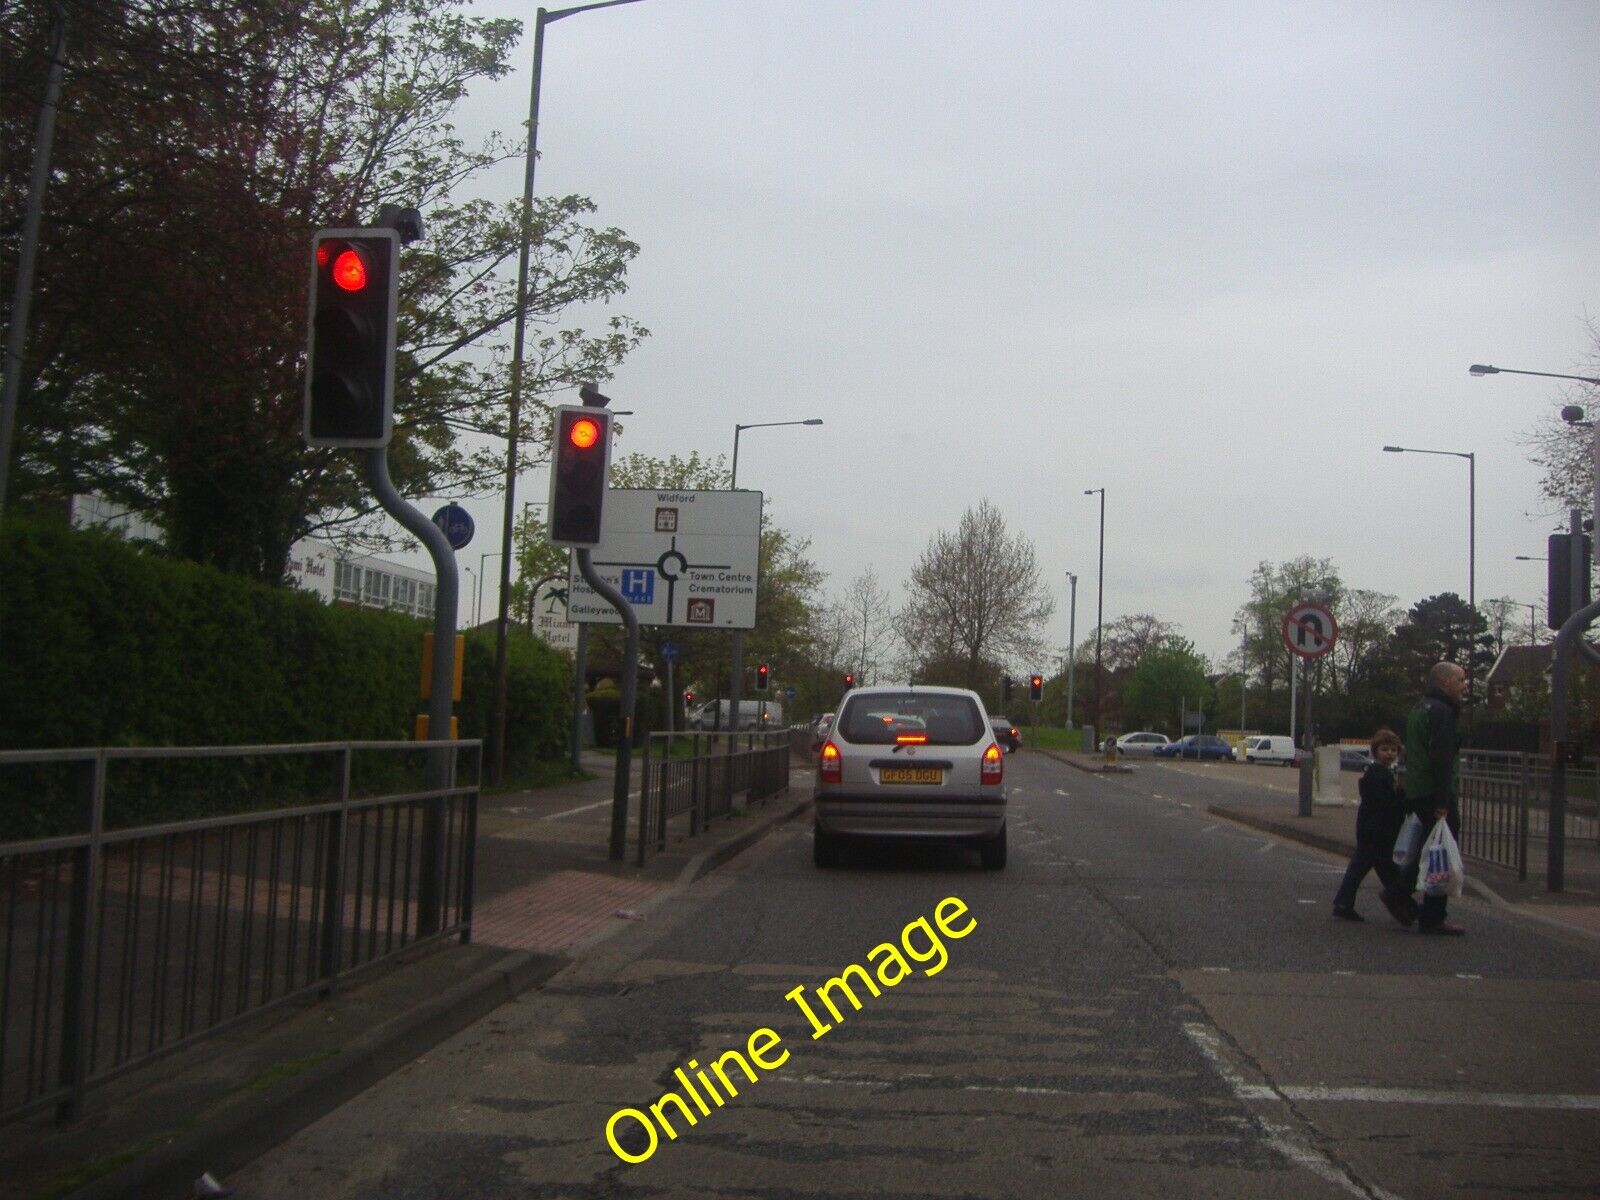 Photo 6x4 Princes Road approaching the Miami roundabout Chelmsford The Mi c2012